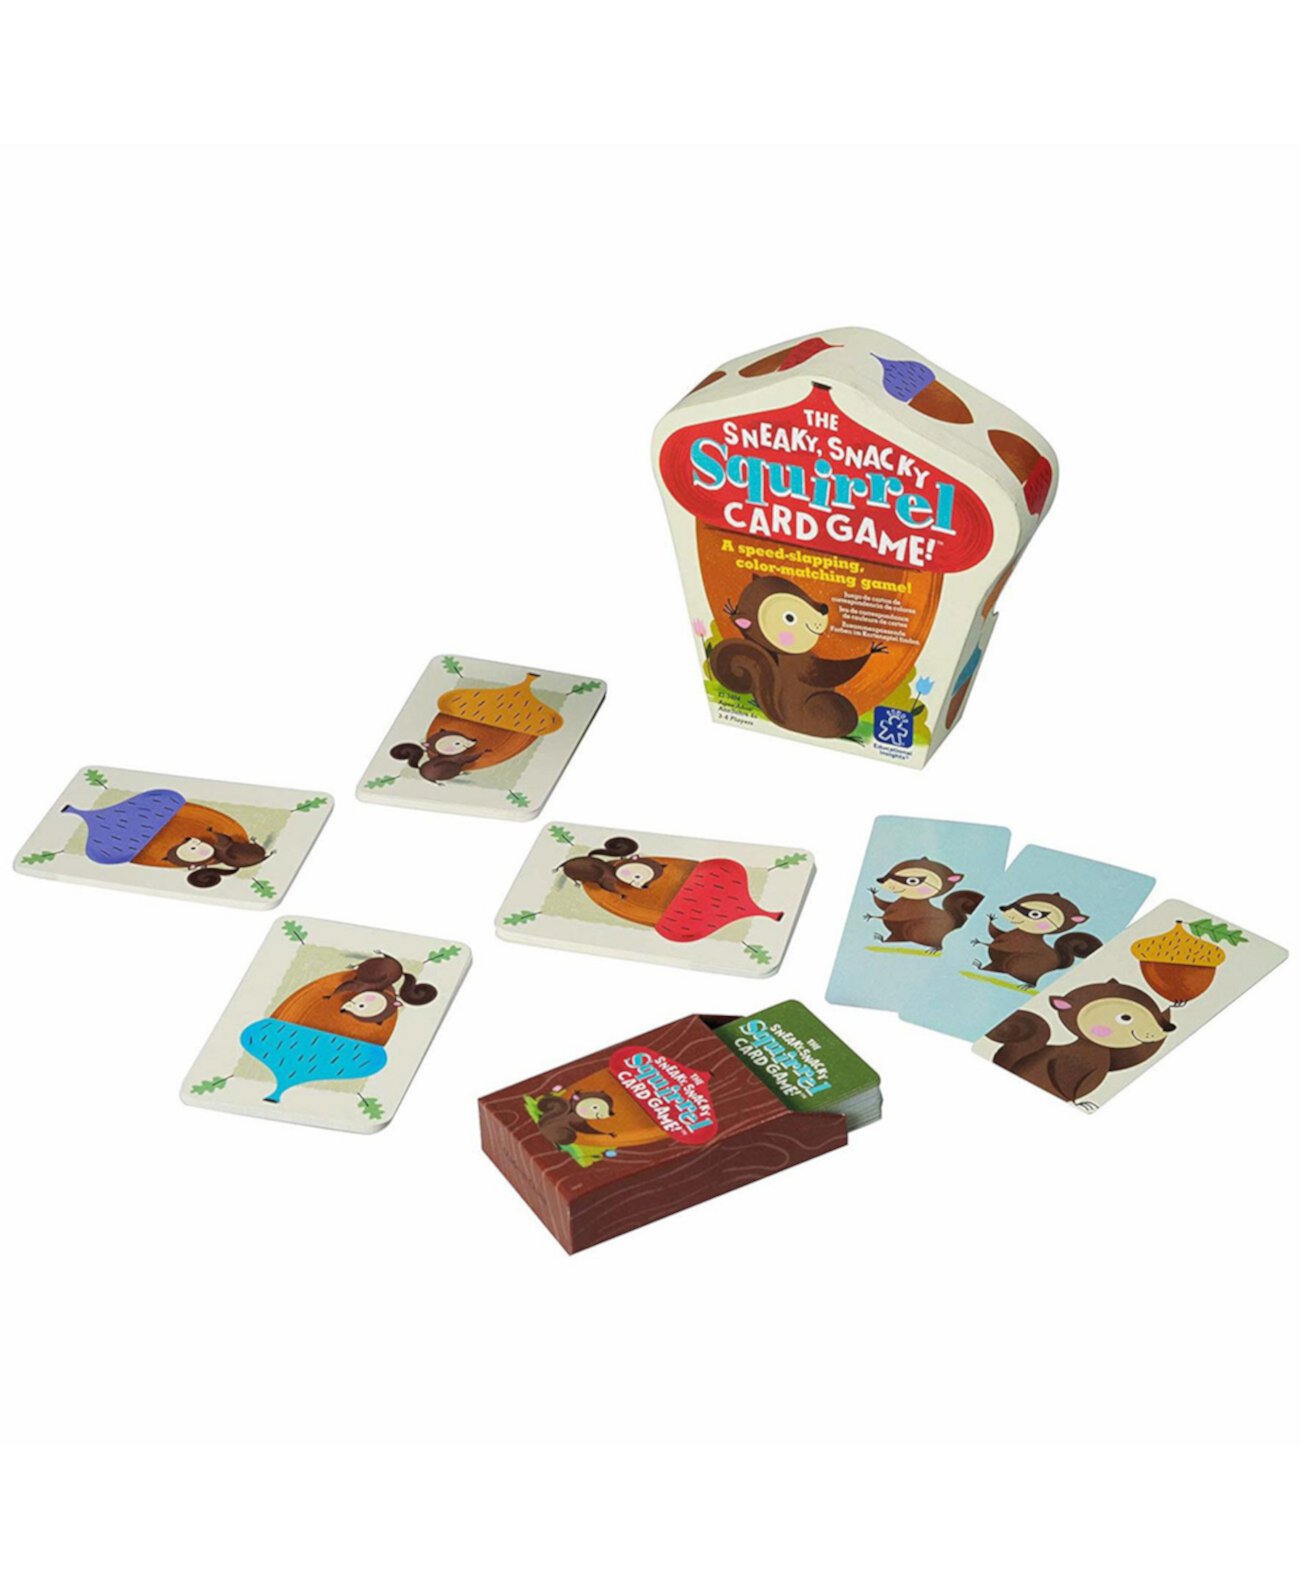 Sneaky, Snacky Squirrel Card Game Educational Insights